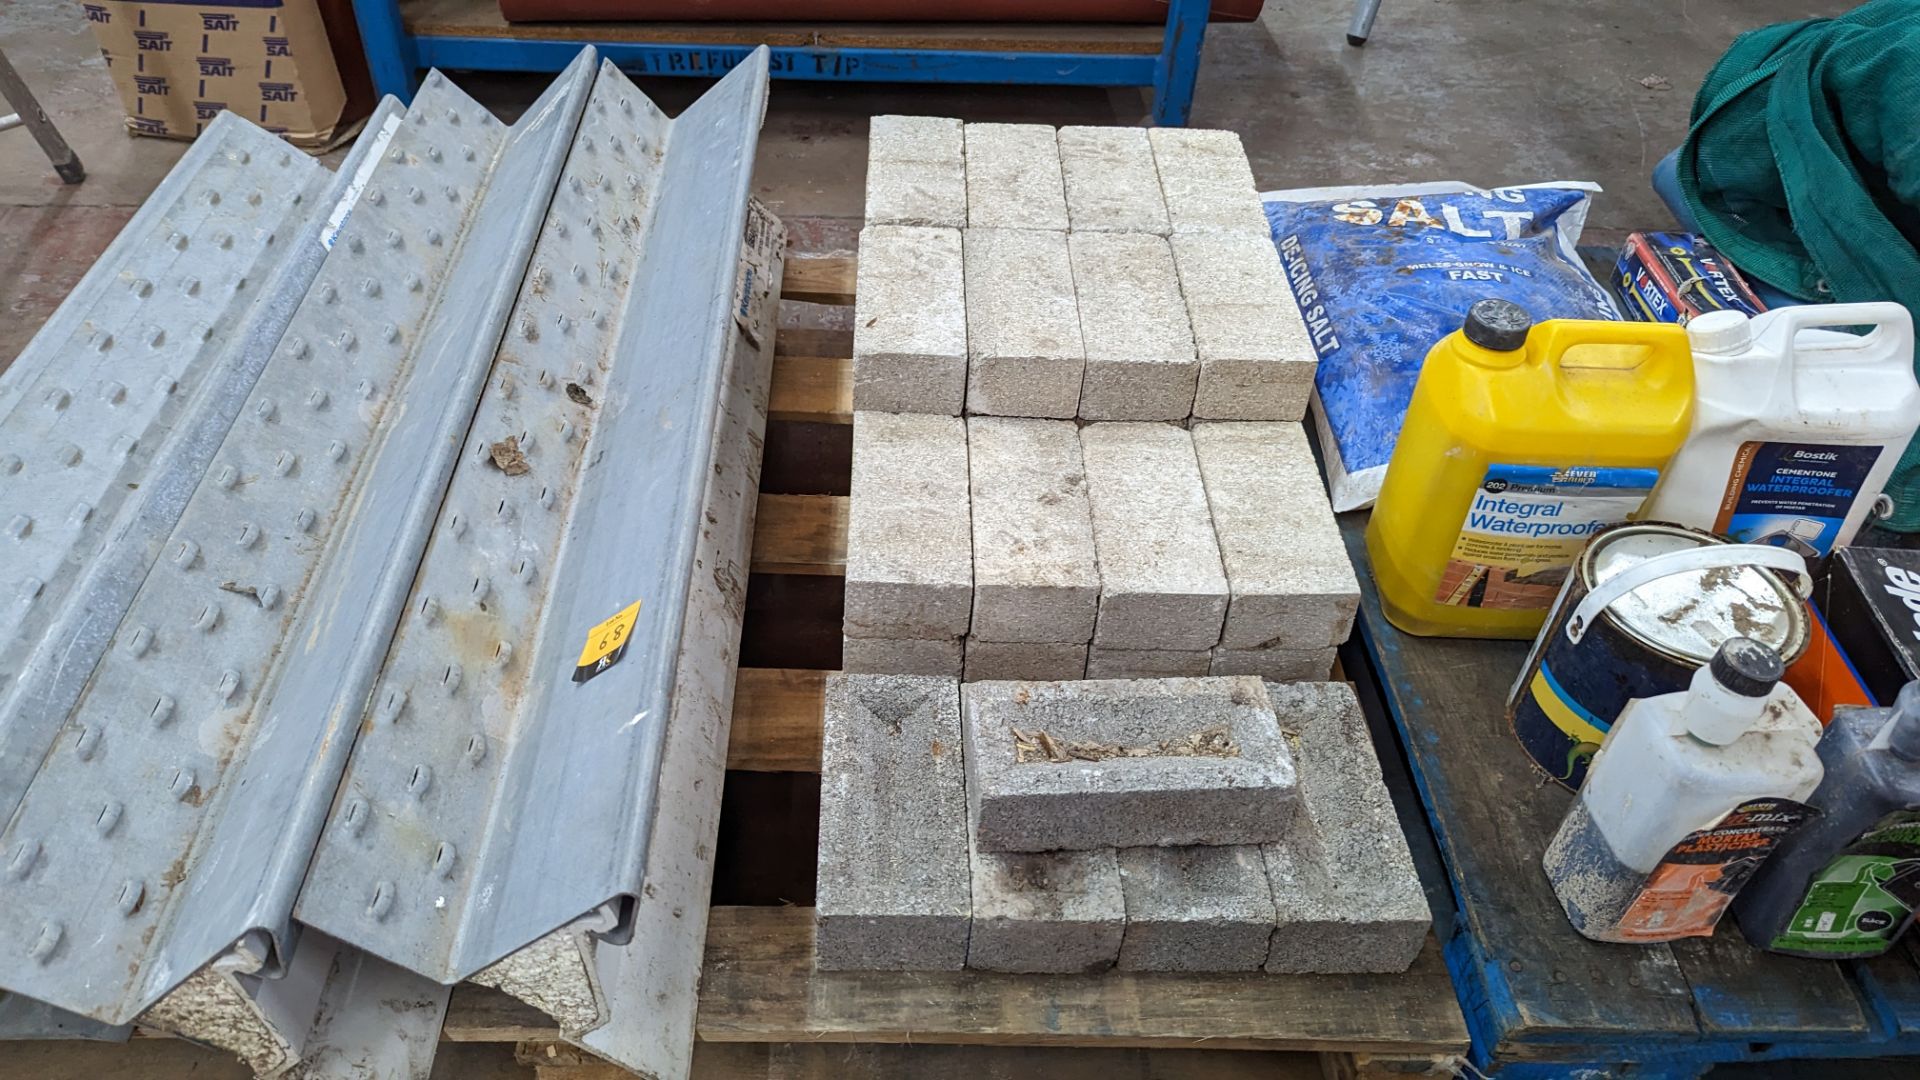 The contents of 2 pallets of miscellaneous items including bricks, brackets, consumables, ratchet st - Image 4 of 11